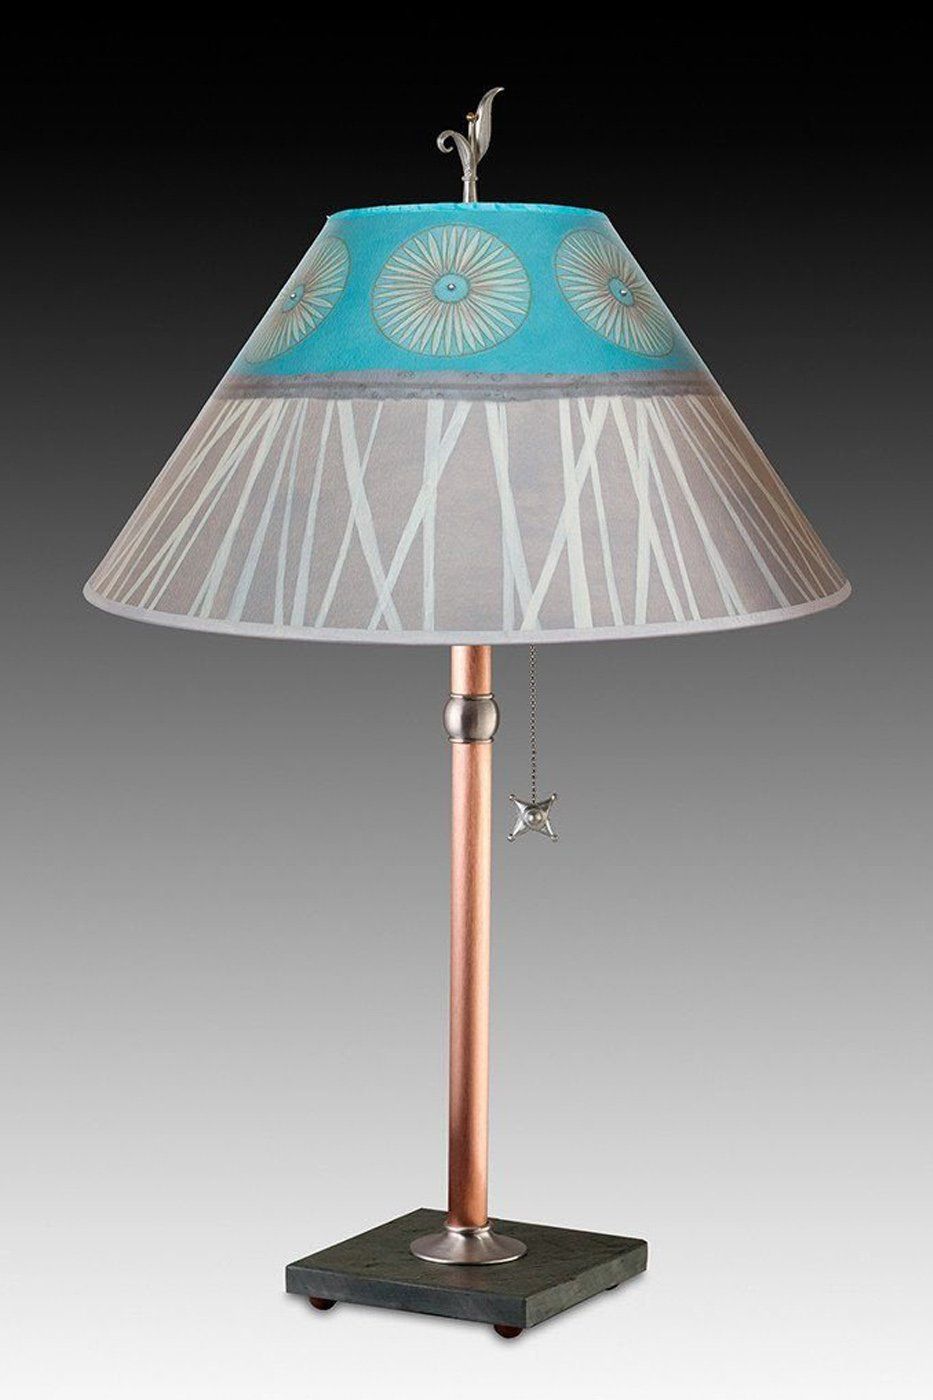 Janna Ugone &amp; Co Table Lamps Copper Table Lamp with Large Conical Shade in Pool